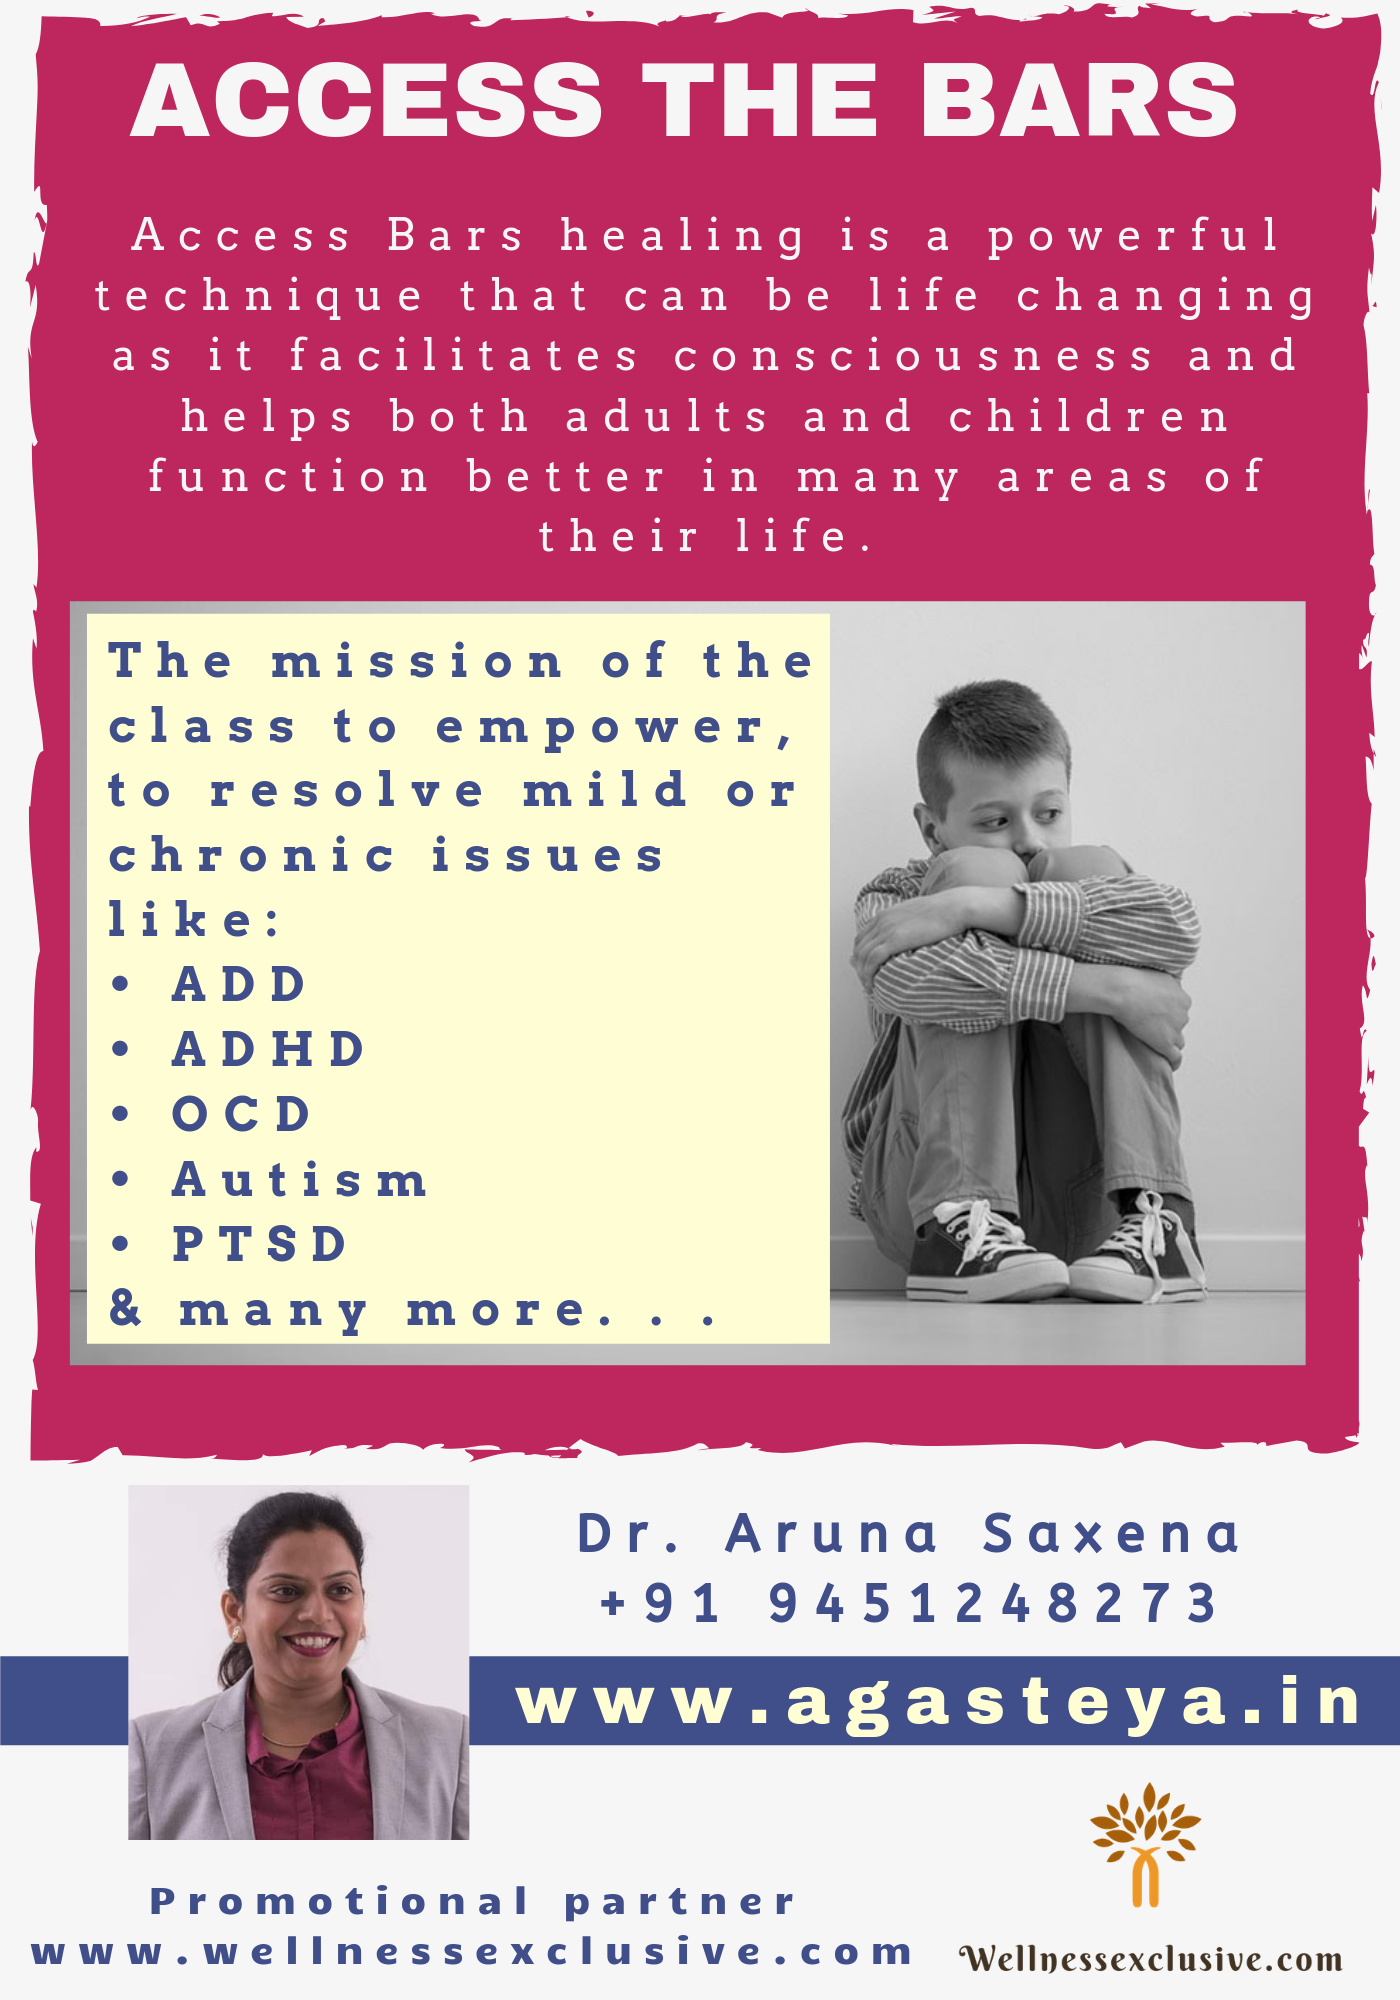 Access Bars Class for ADHD, ADD, OCD, Autism, PCD by Dr. Aruna Saxena - Udaipur